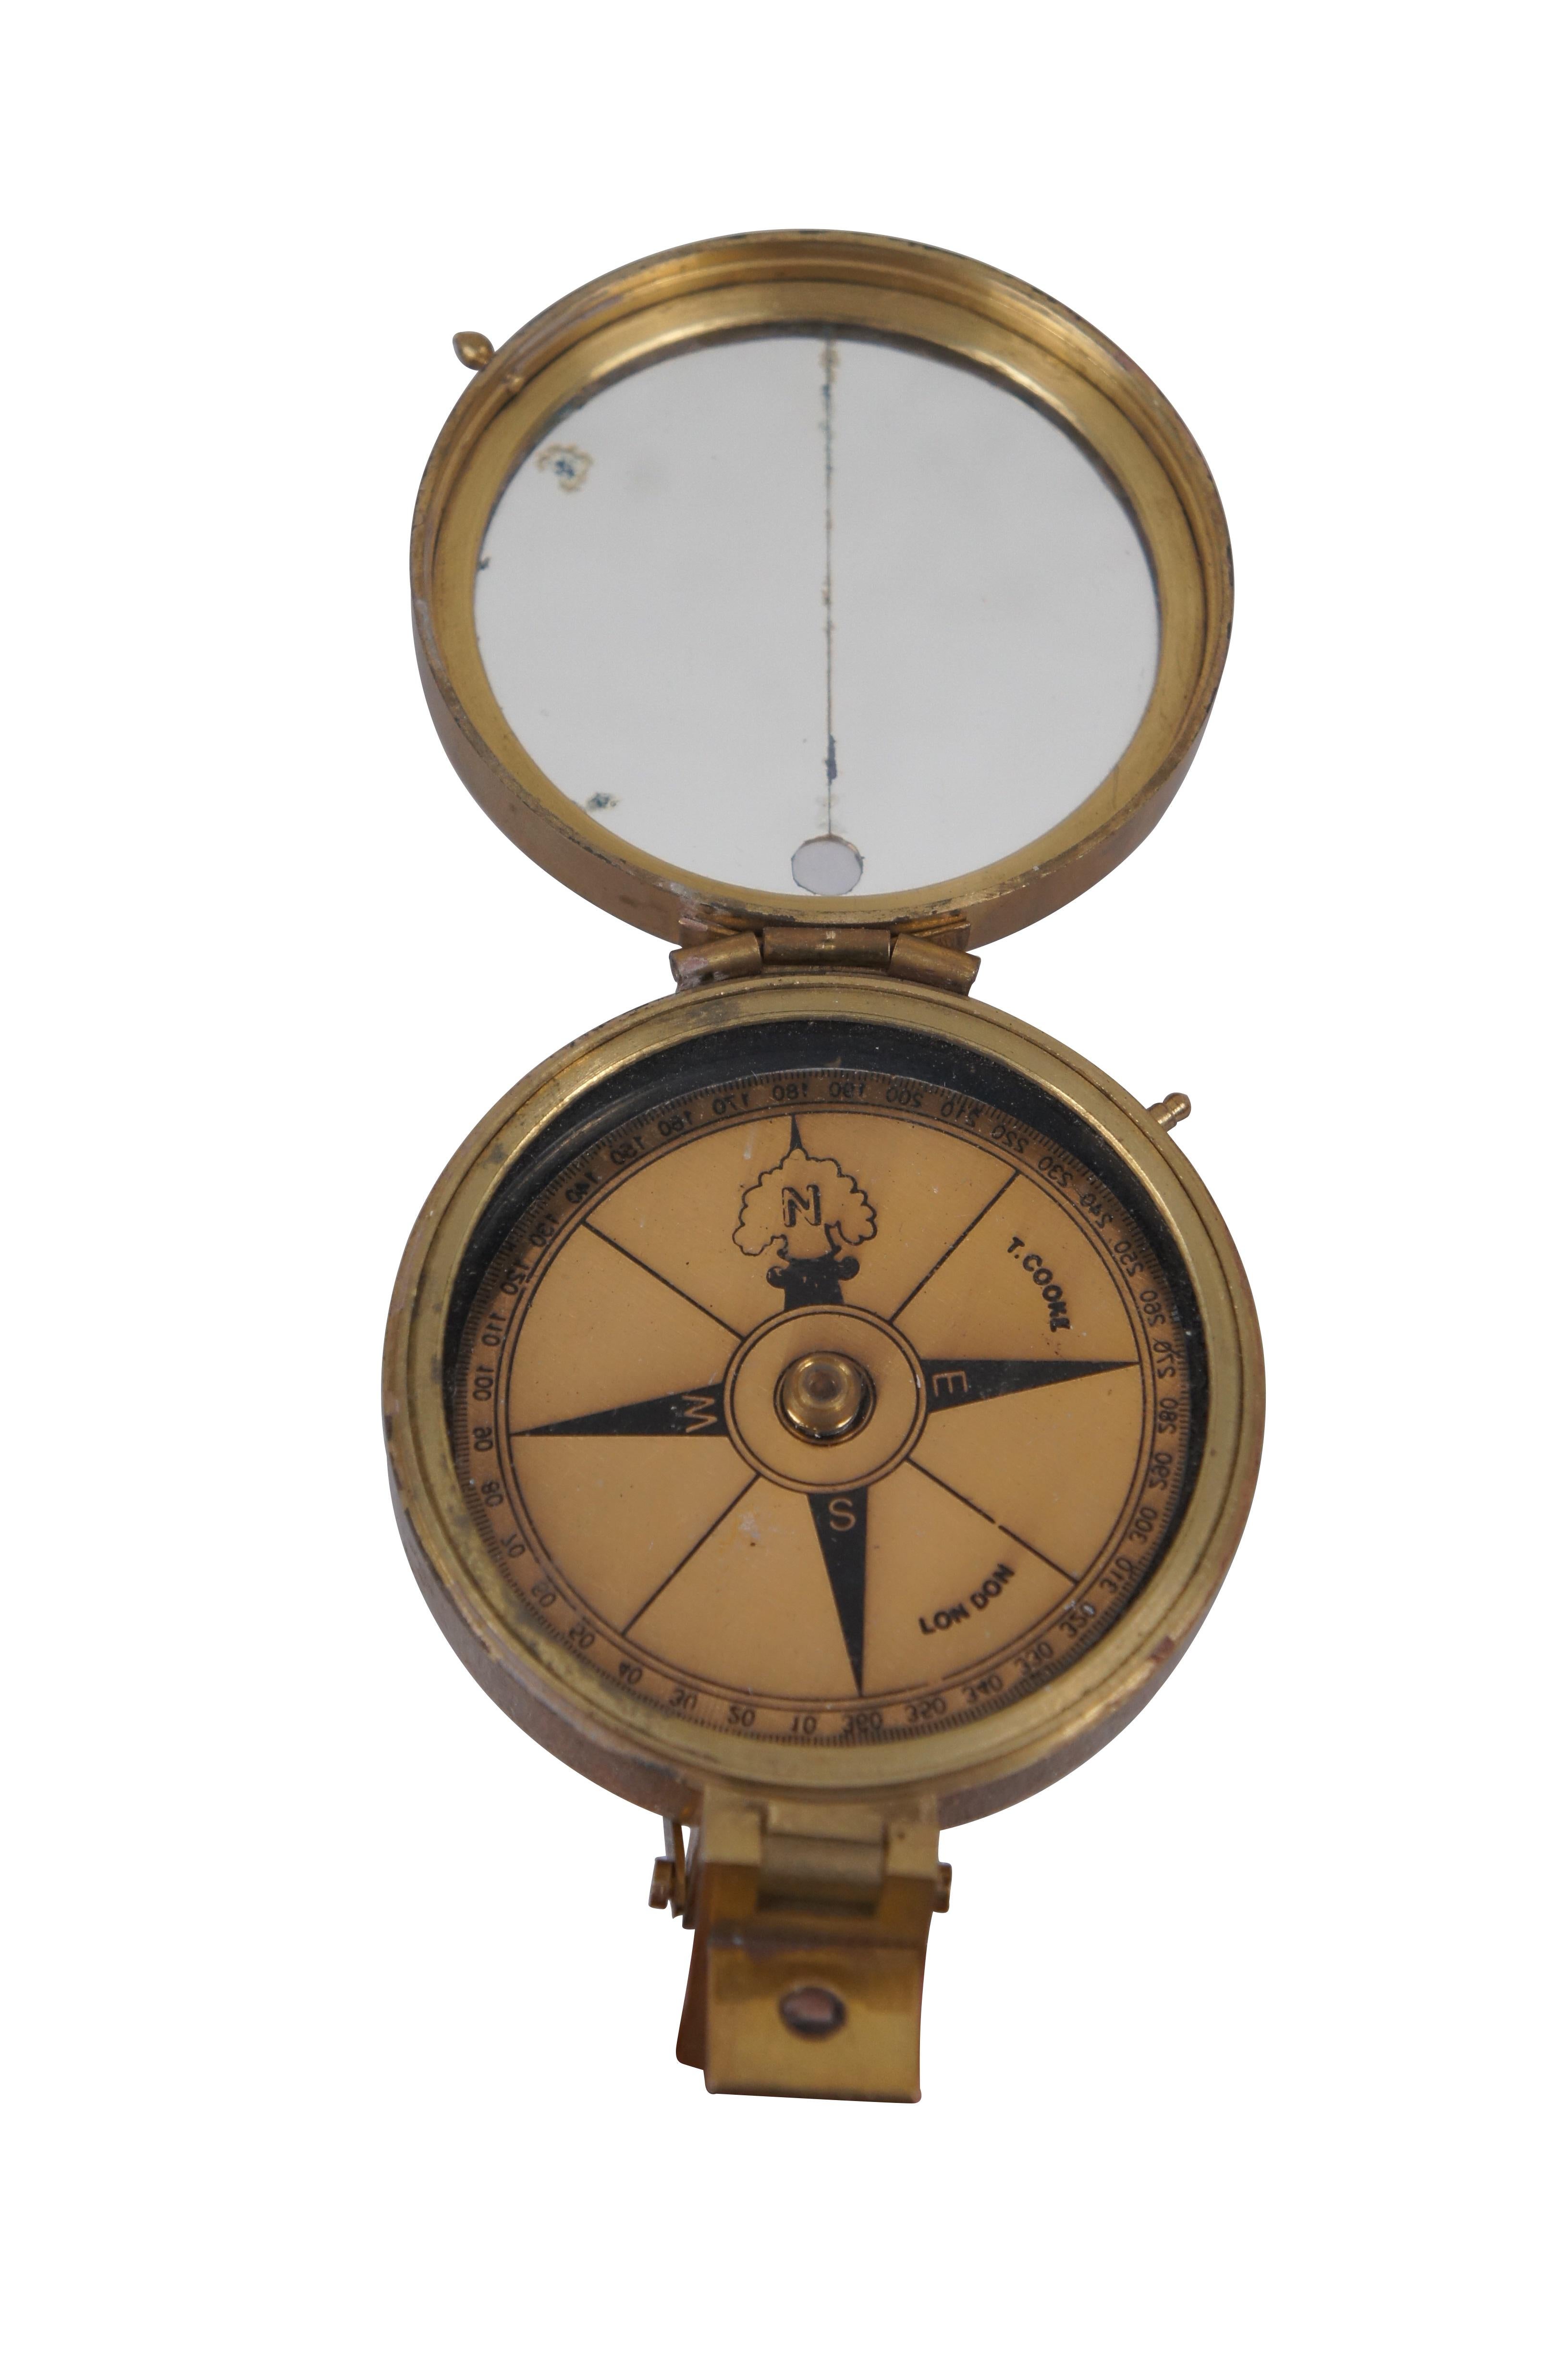 t cooke london compass